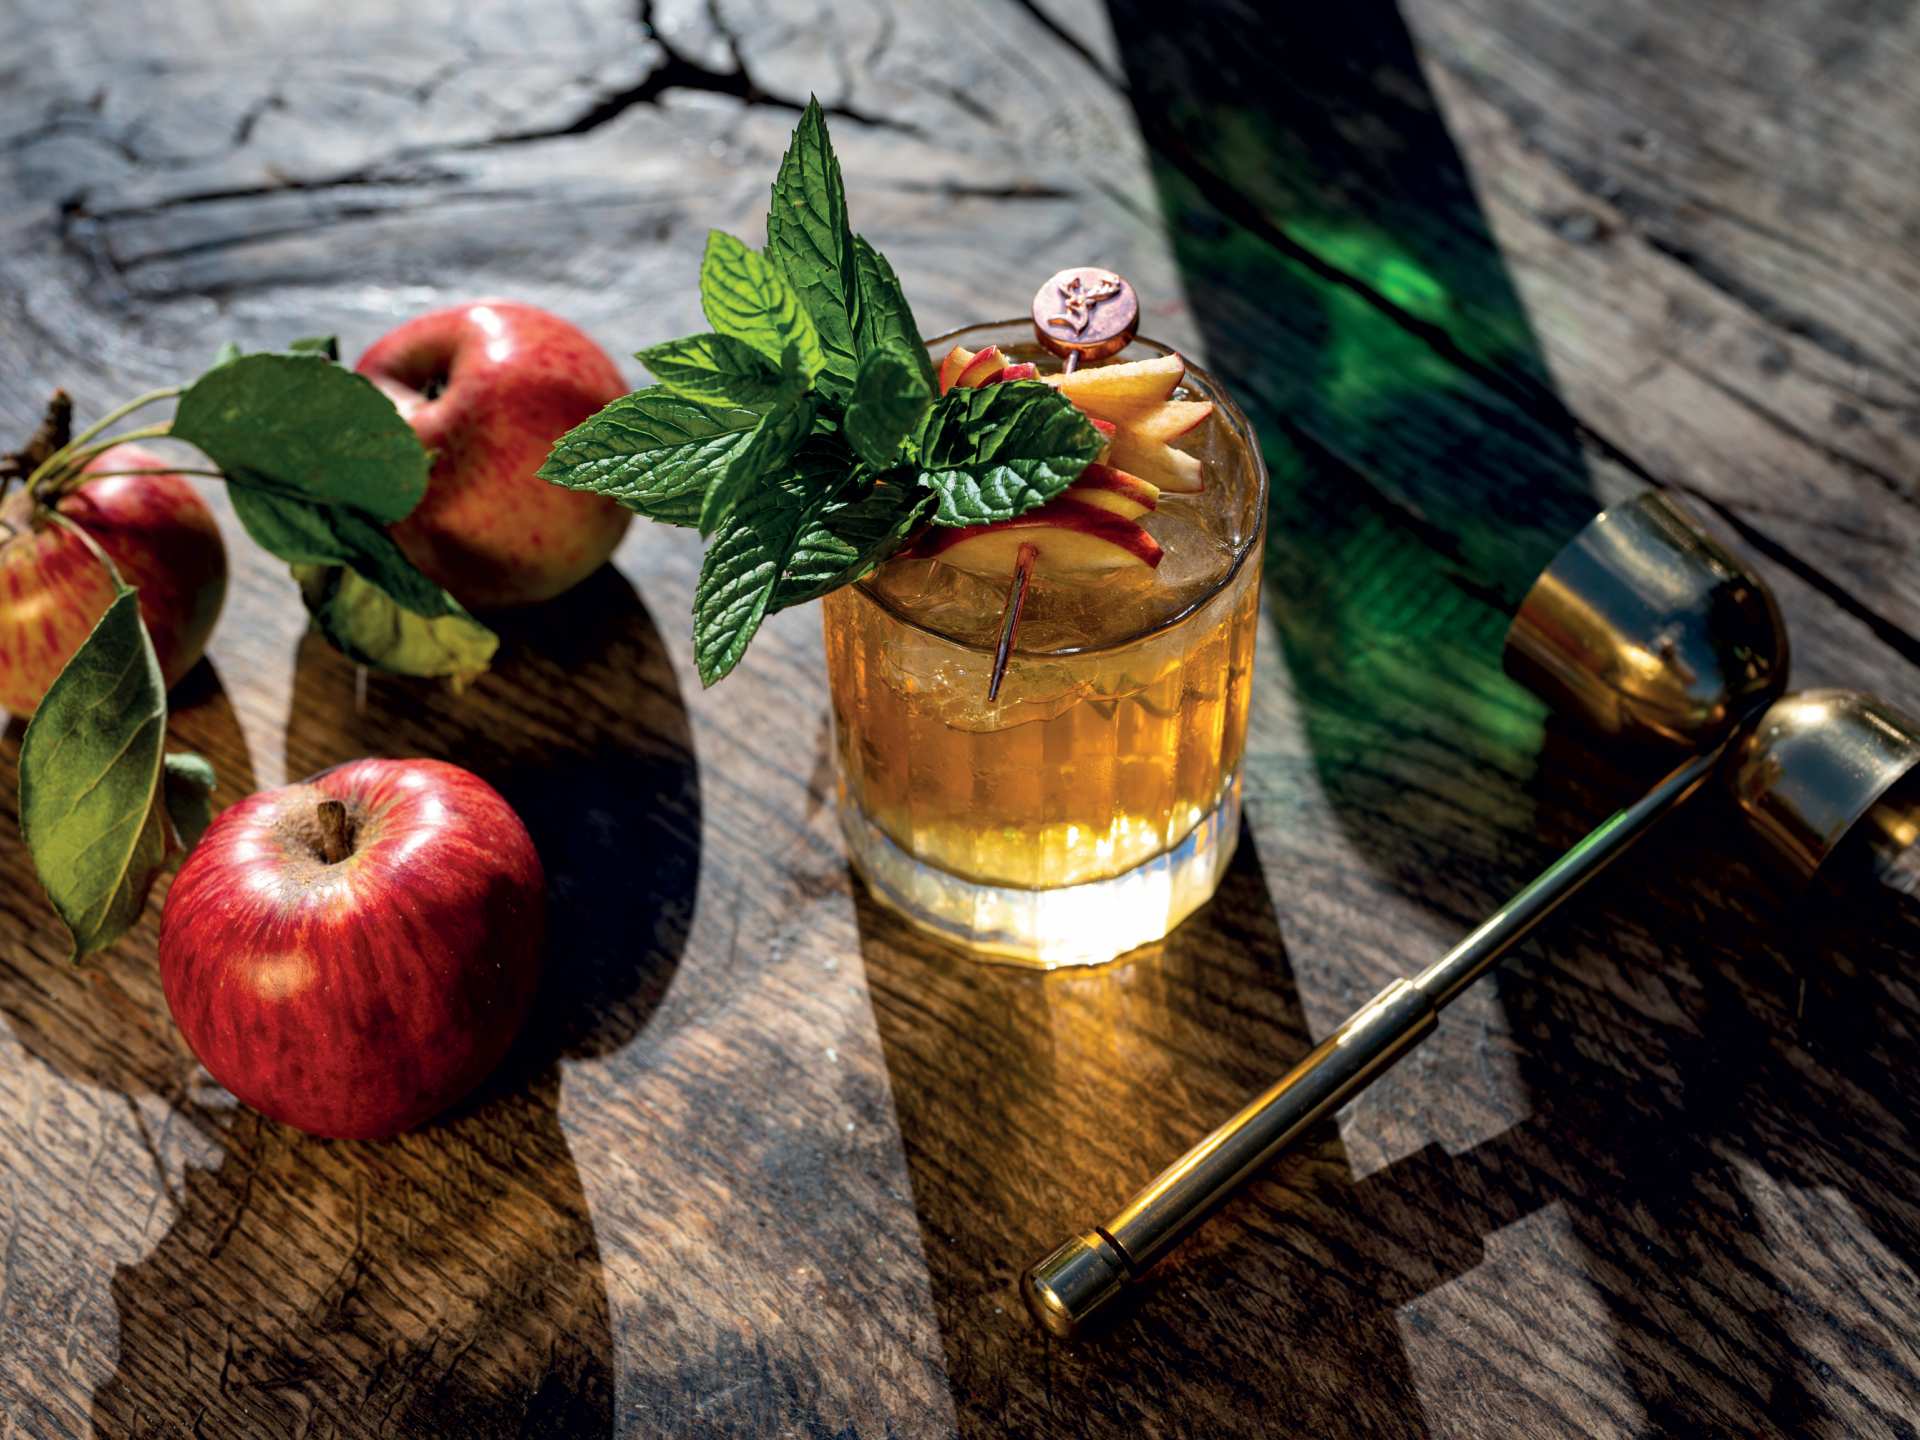 Glenfiddich The Orchard Experiment | The Apple Orchard, a Glenfiddich cocktail, sits next to apples and a jigger